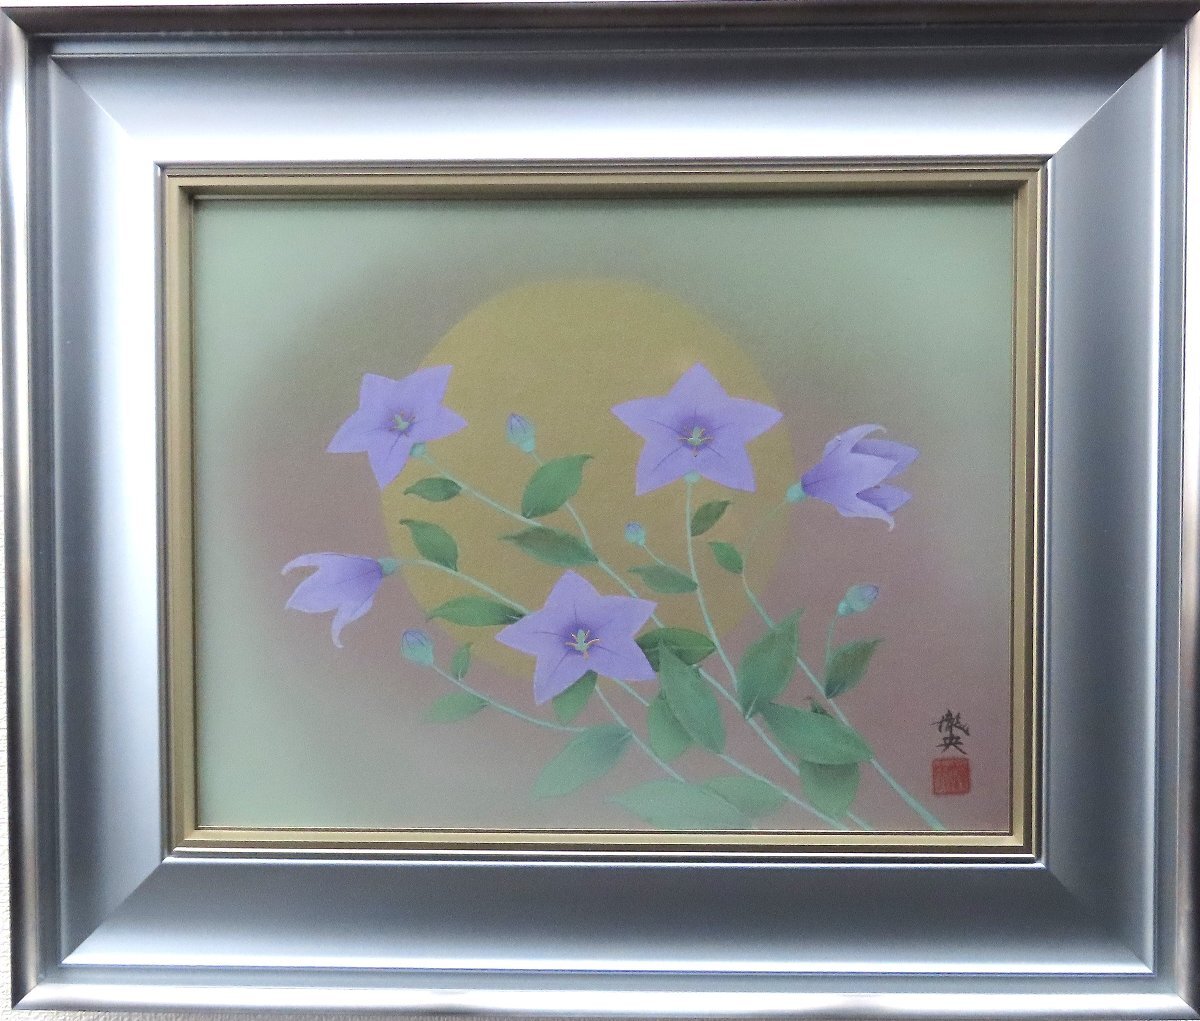 A classy work of art featuring bellflowers illuminated by the full moon. Japanese painting by Suzuki Takio, No. 6, Late Autumn [53 years of experience and trust, Seiko Gallery], Painting, Japanese painting, Flowers and Birds, Wildlife